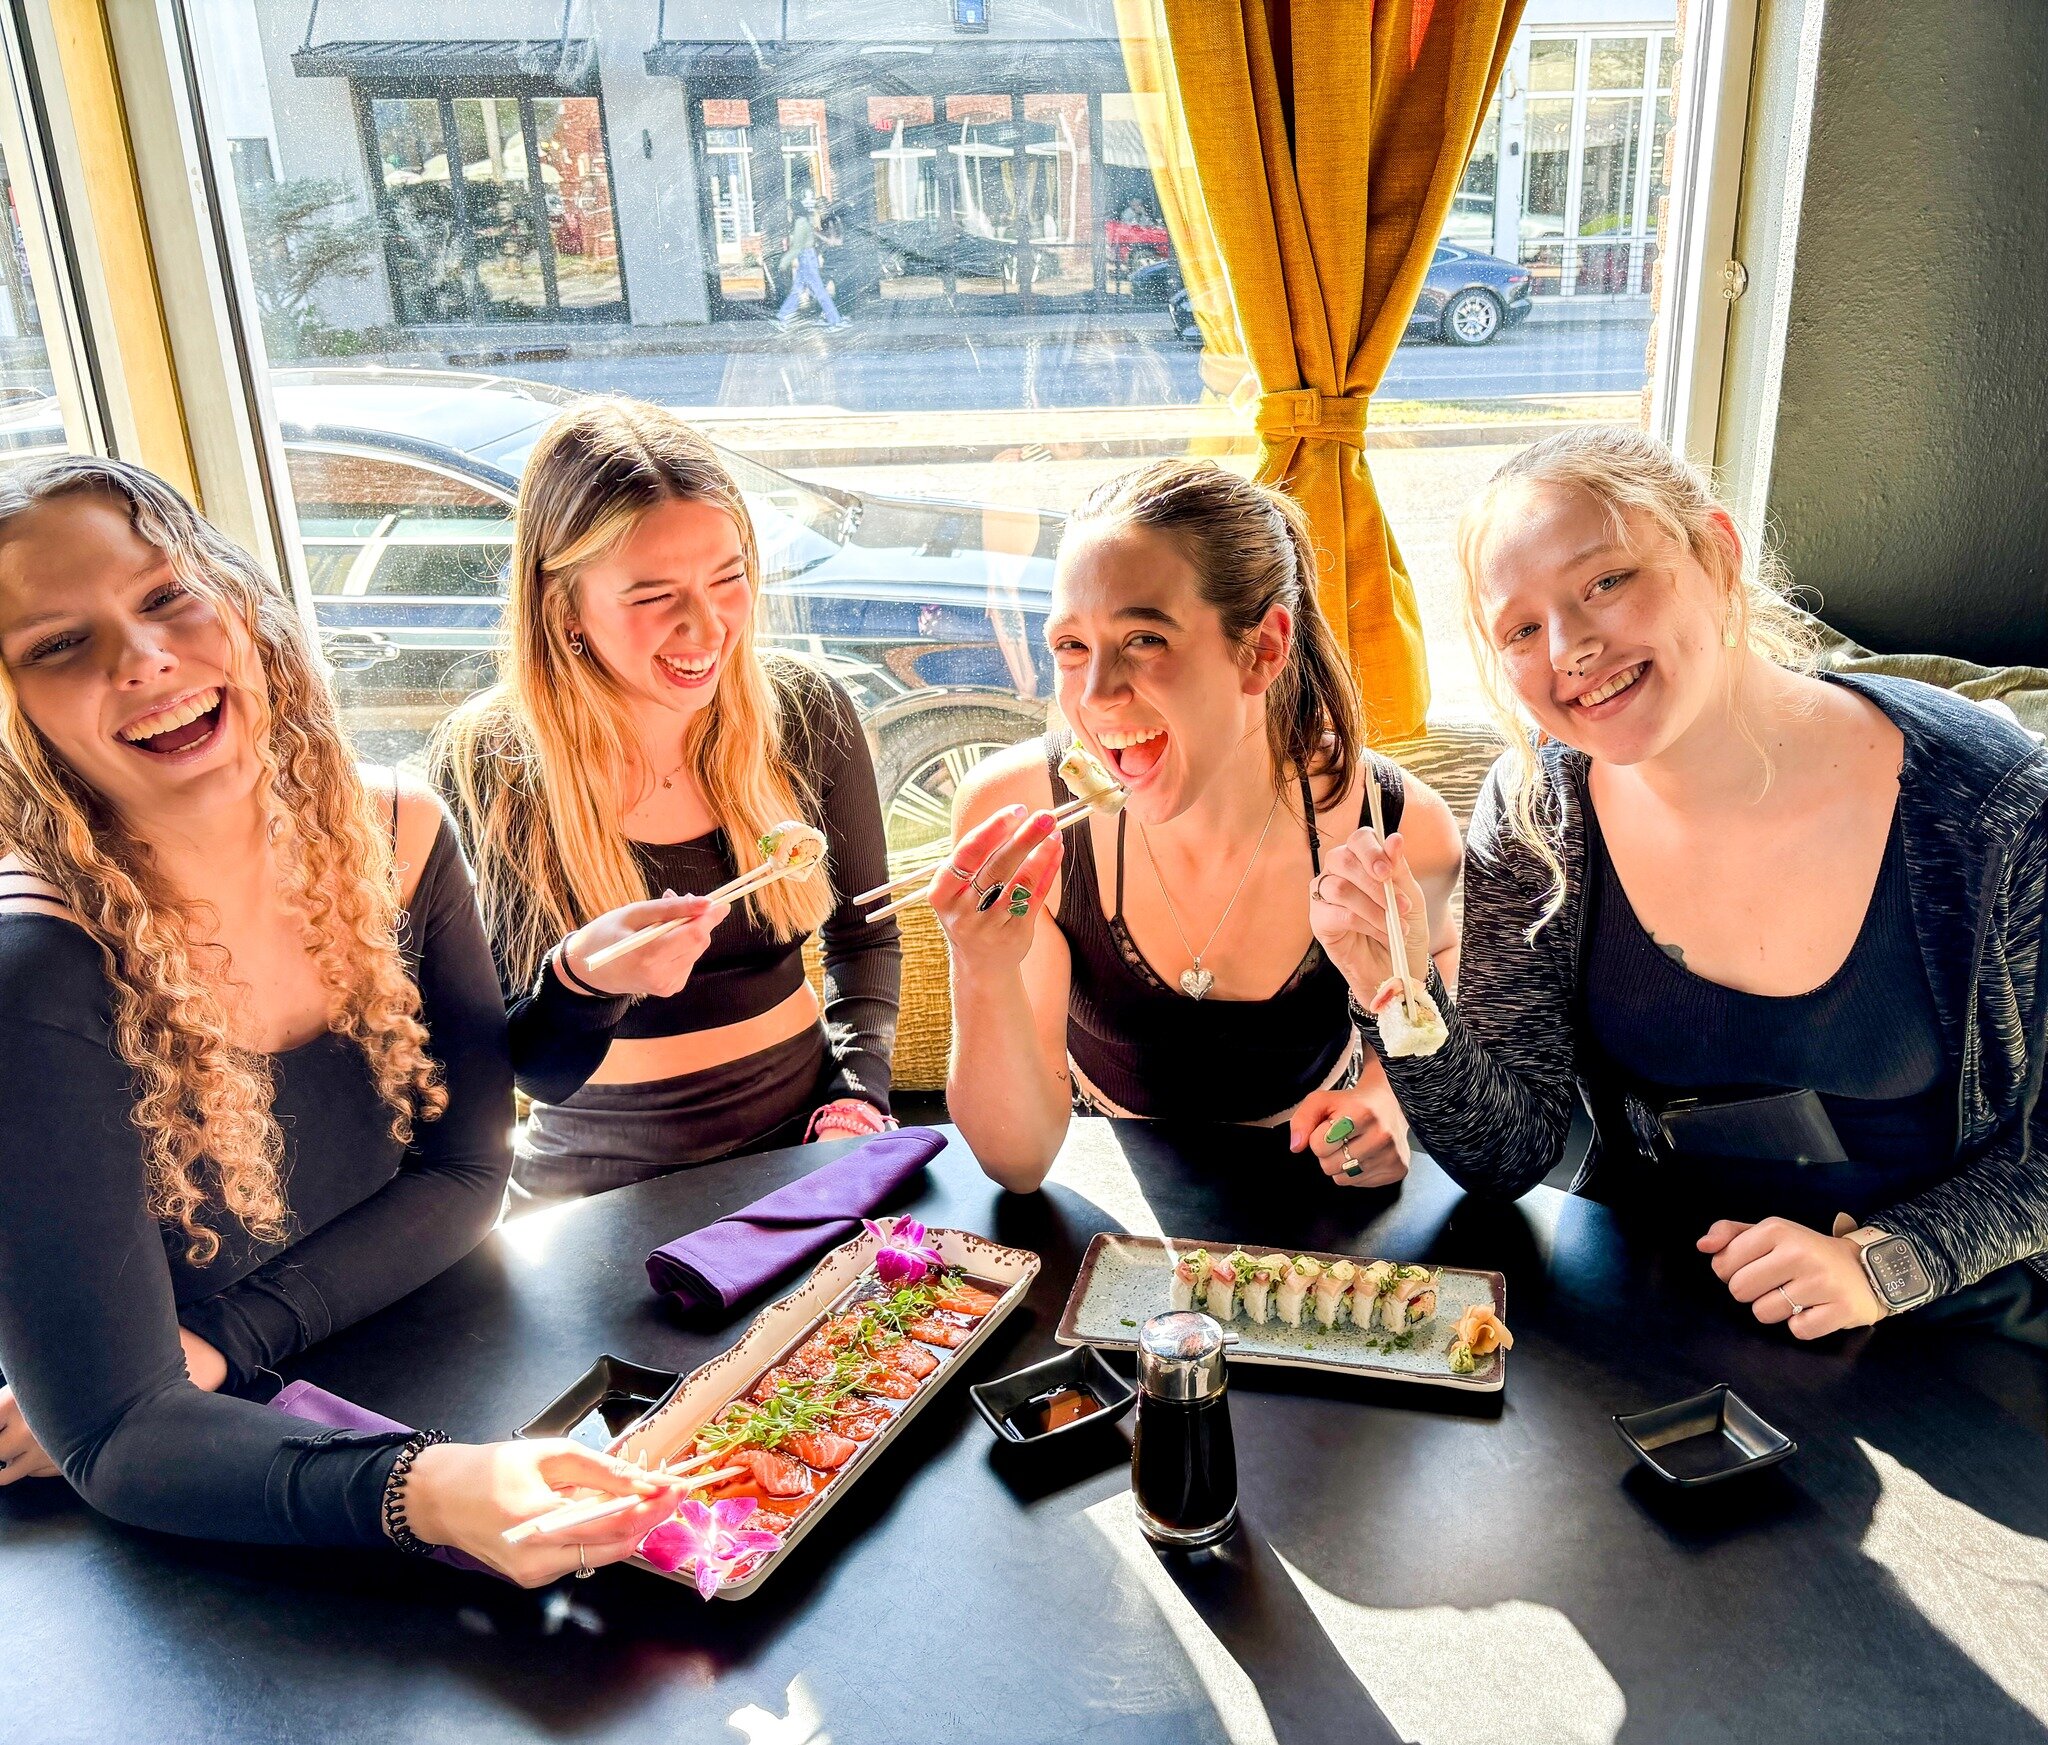 You can sit with us. On Wednesdays, we only eat Sushi. #tulsafoodie #tulsaeats #brooksidetulsa